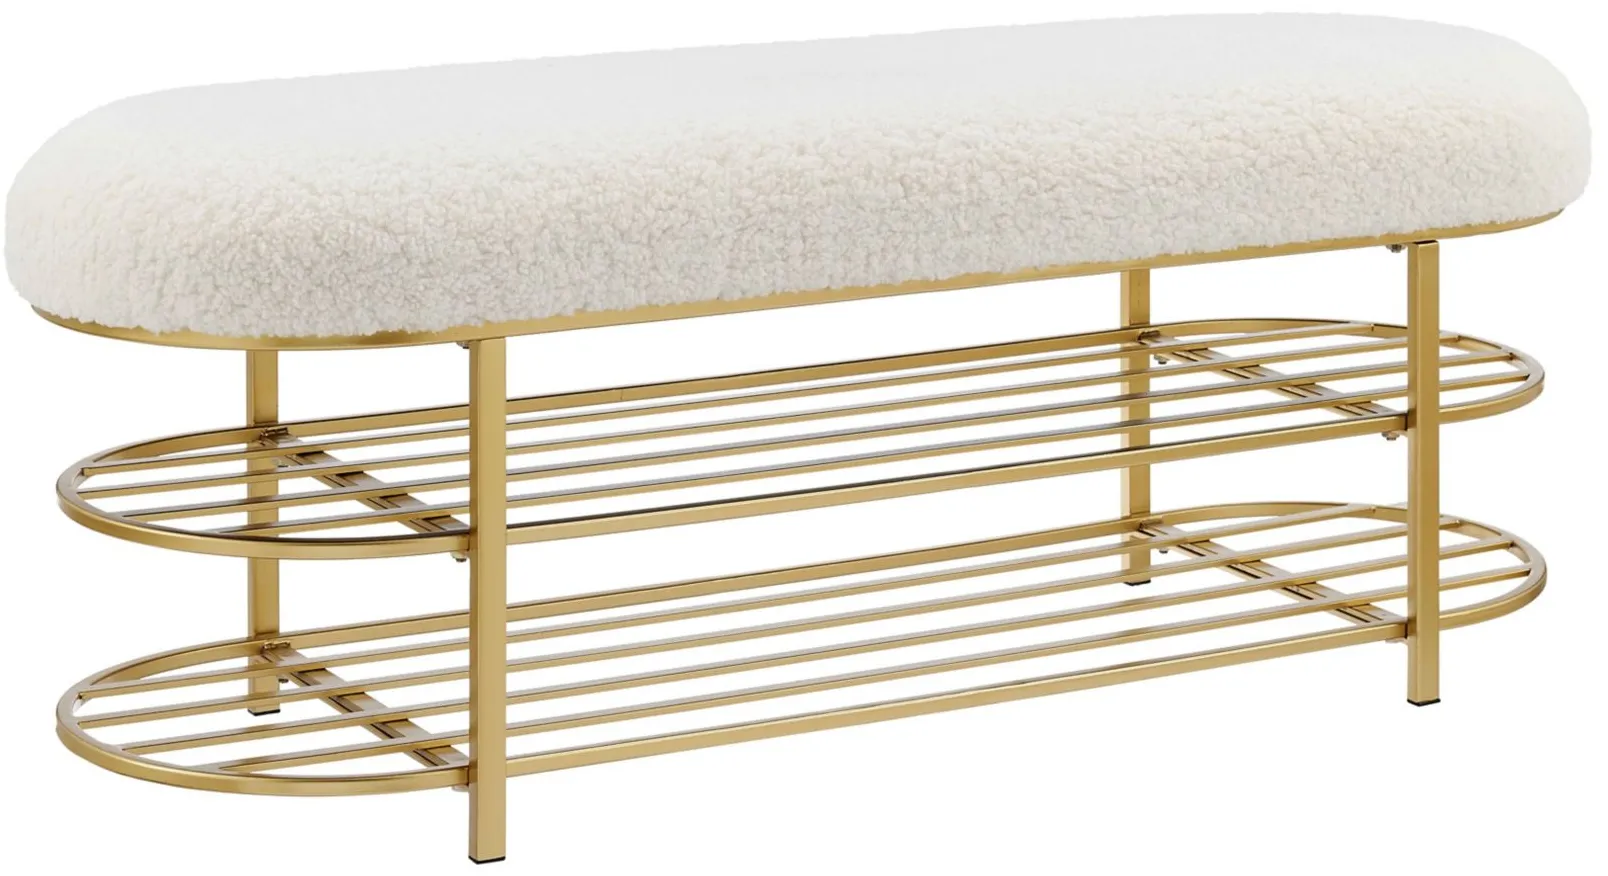 Frisly Shearling Fabric Bench with Shelf in Shearling Beige by New Pacific Direct